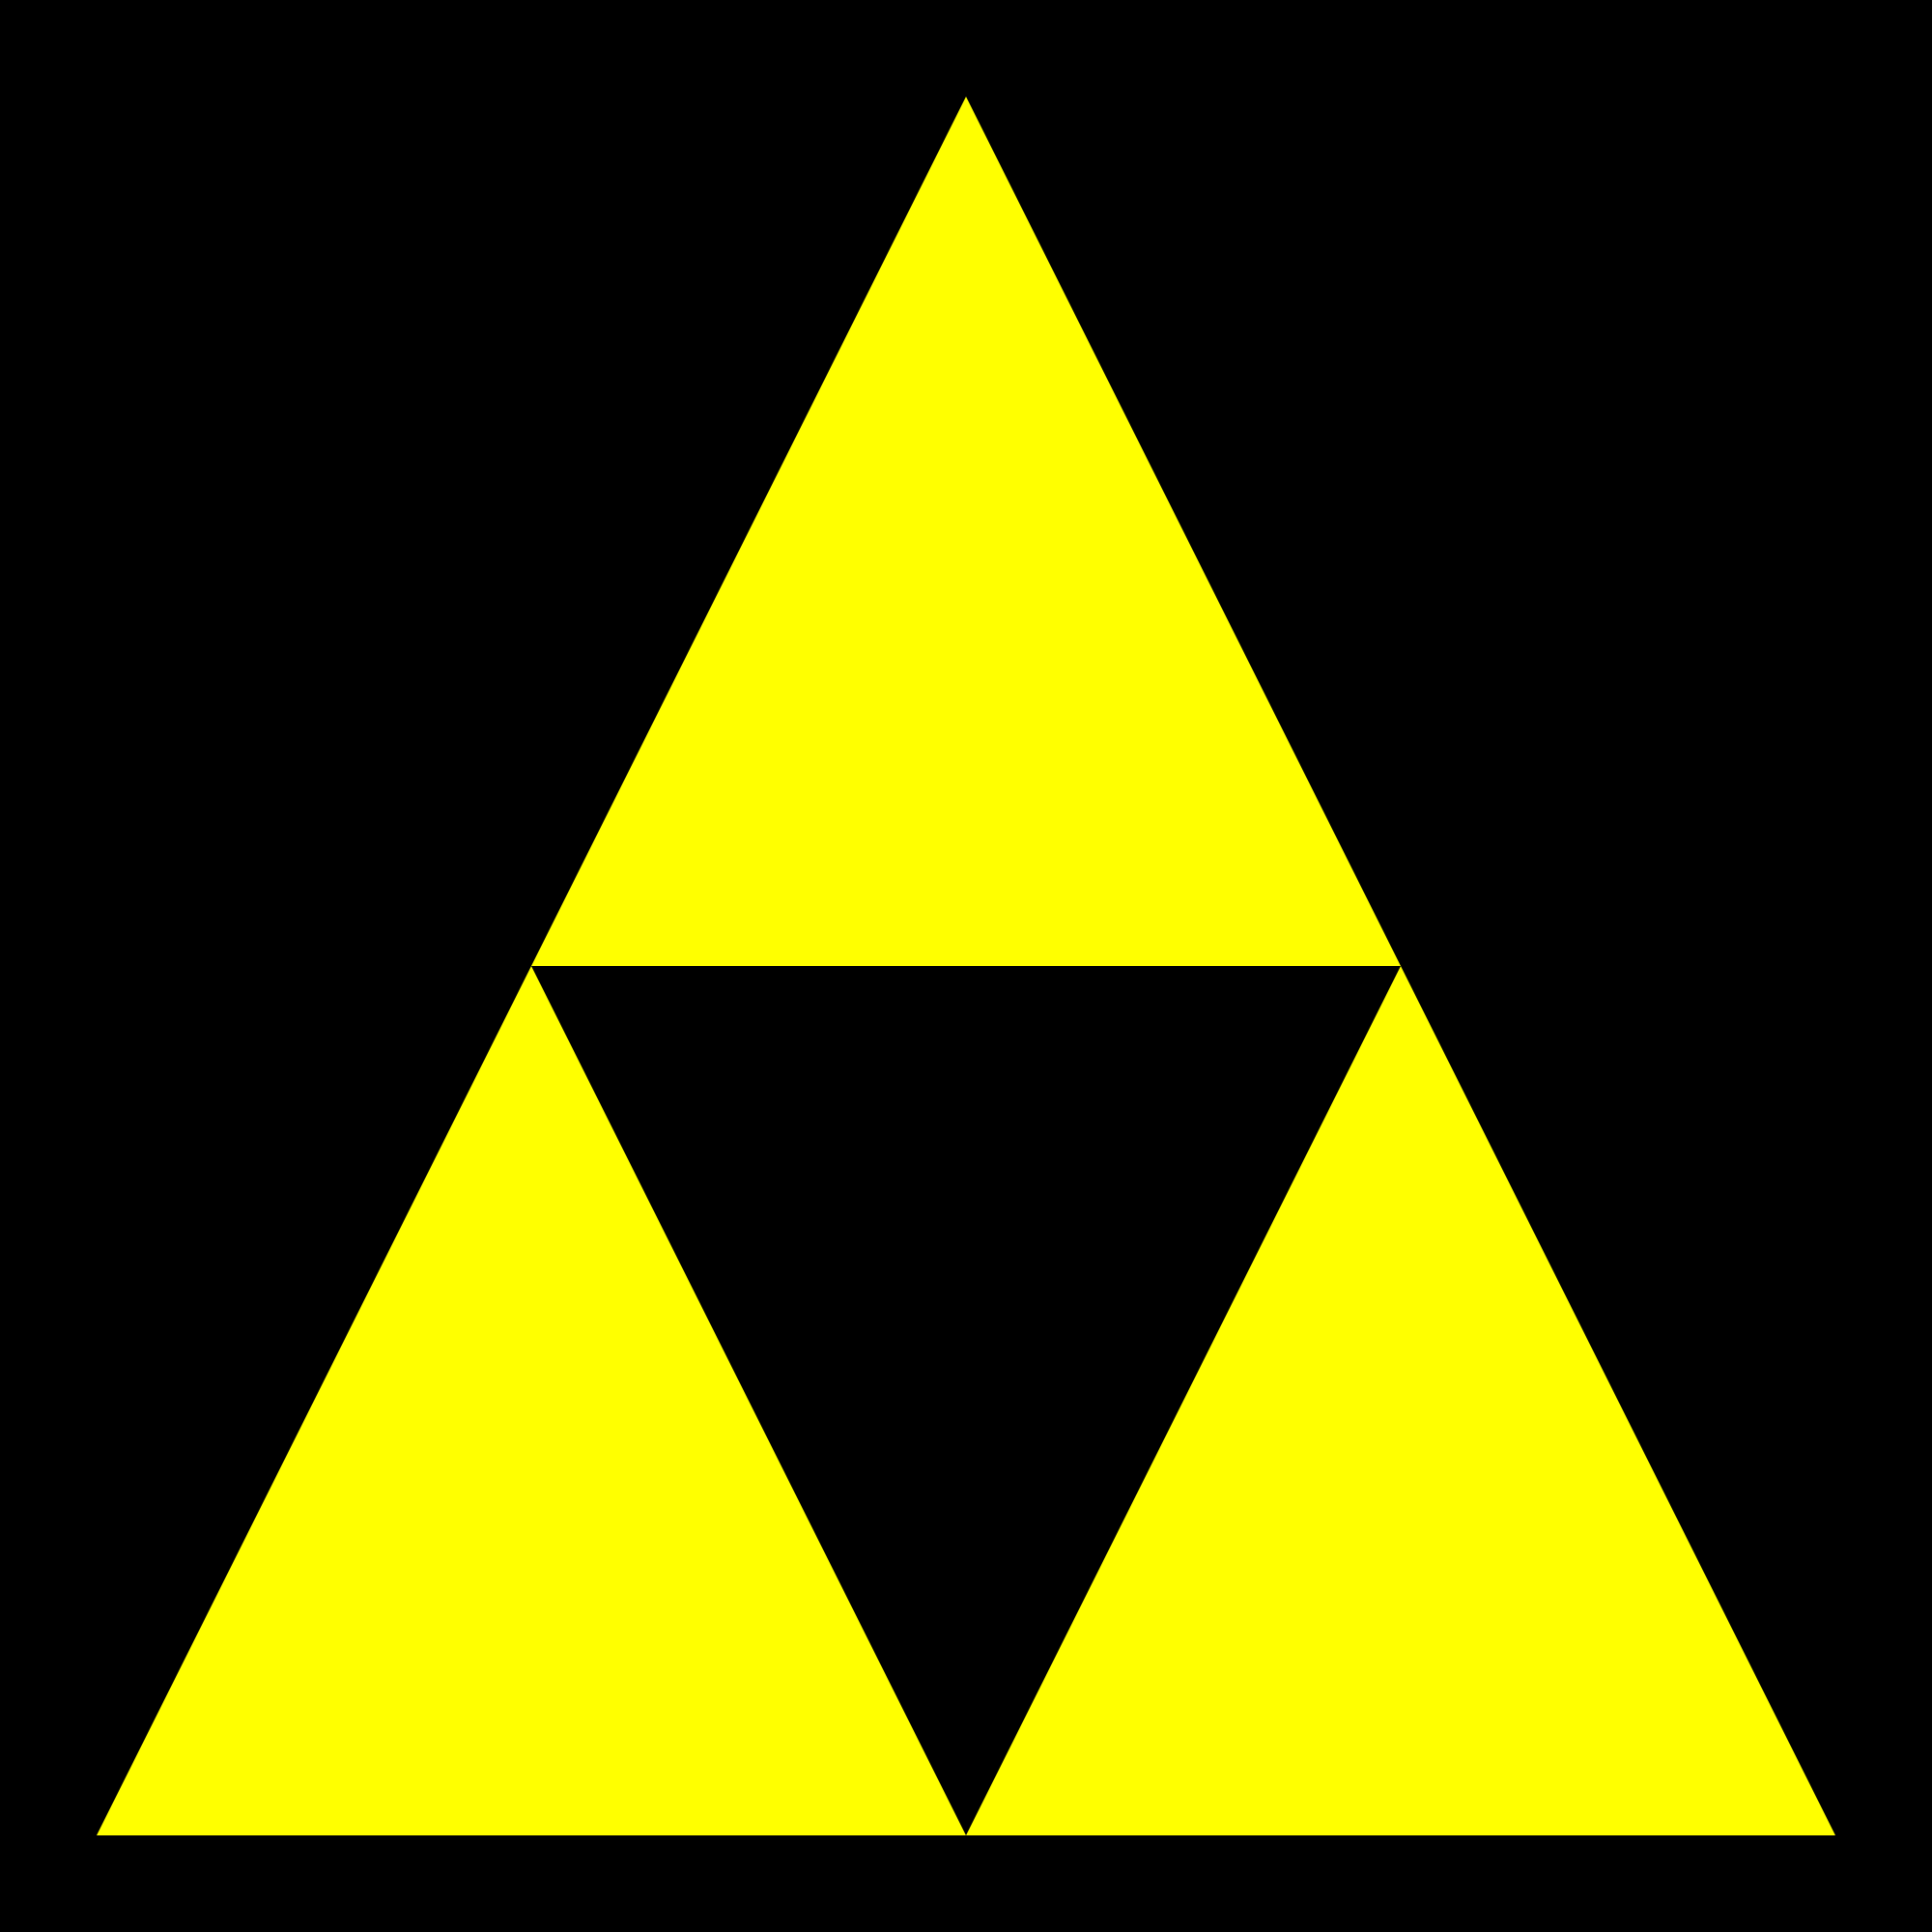 Over a Yellow Triangle Logo - File:Three Triangles.svg - Wikimedia Commons